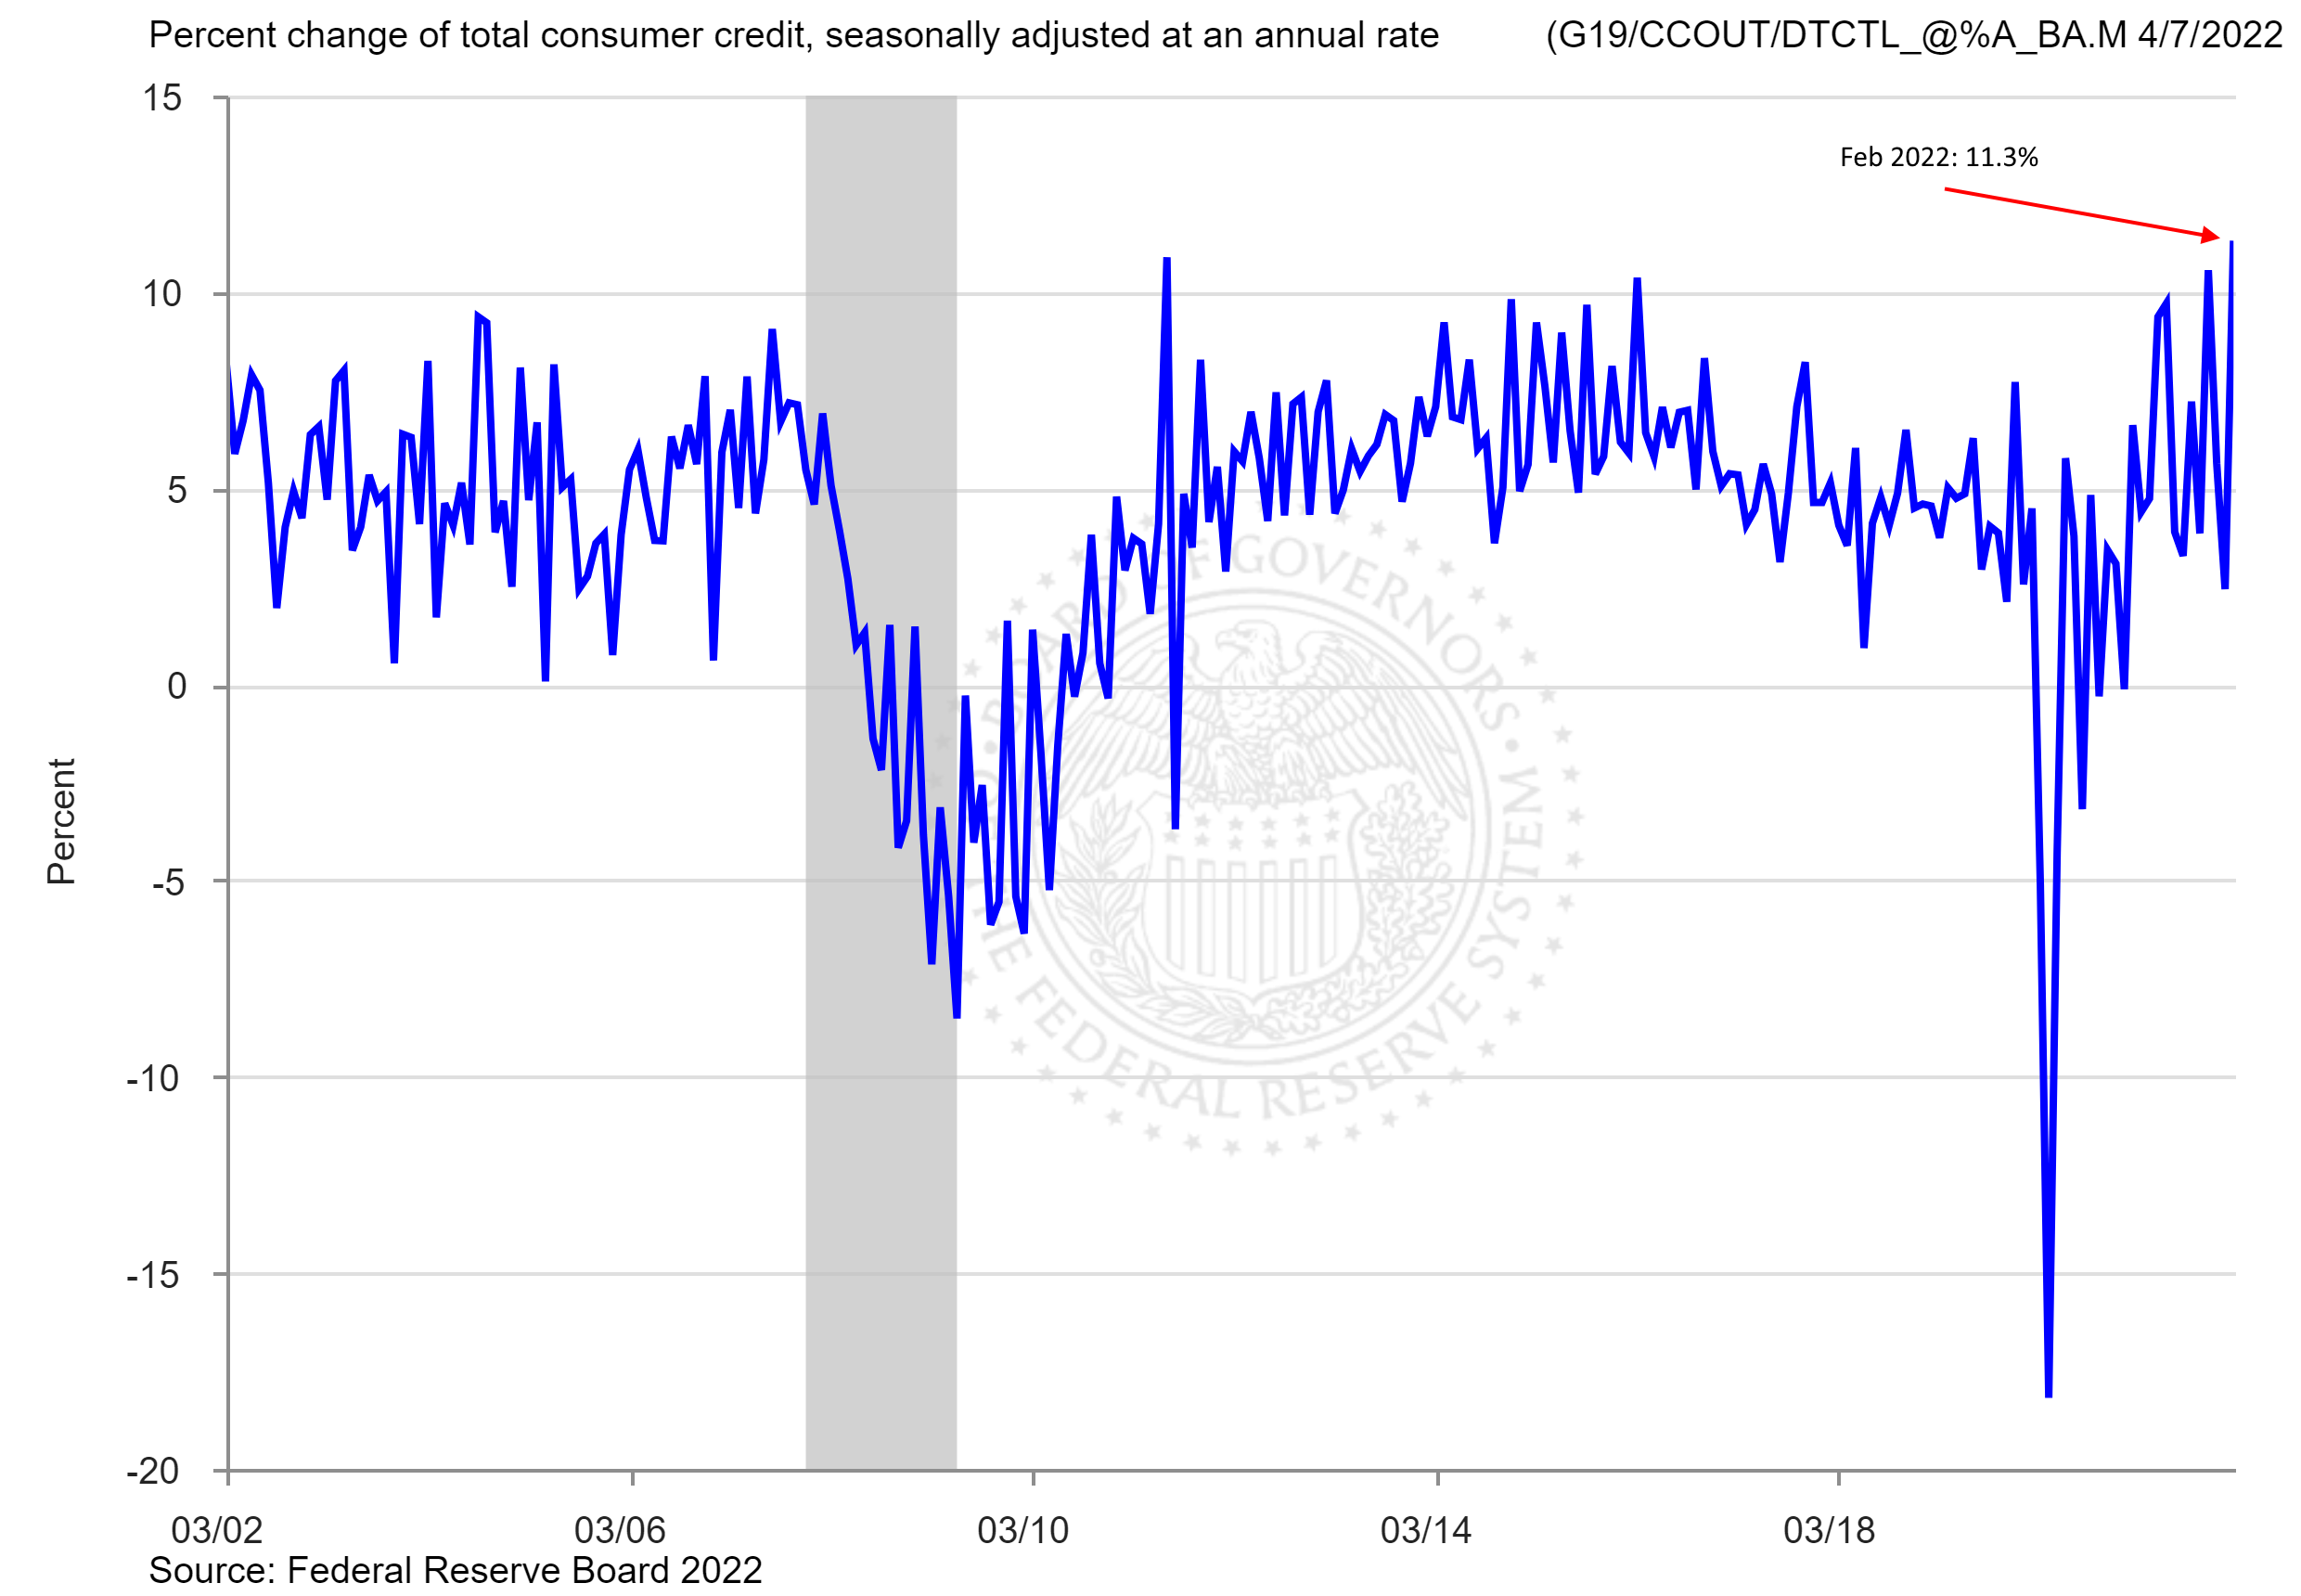 Percent change of total consumer credit, seasonally adjusted at an annual rate, March 2002-February 2022. Debt levels jumped by nearly $42 billion to a total of almost $4.5 trillion, an annual increase of 11.3 percent, seasonally adjusted, which set a new high and far outperformed economists’ expectations. In January 2022, total credit had grown only 2.4 percent. The shaded bar indicates a period of business recession as defined by the National Bureau of Economic Research. Graphic: U.S. Federal Reserve Board